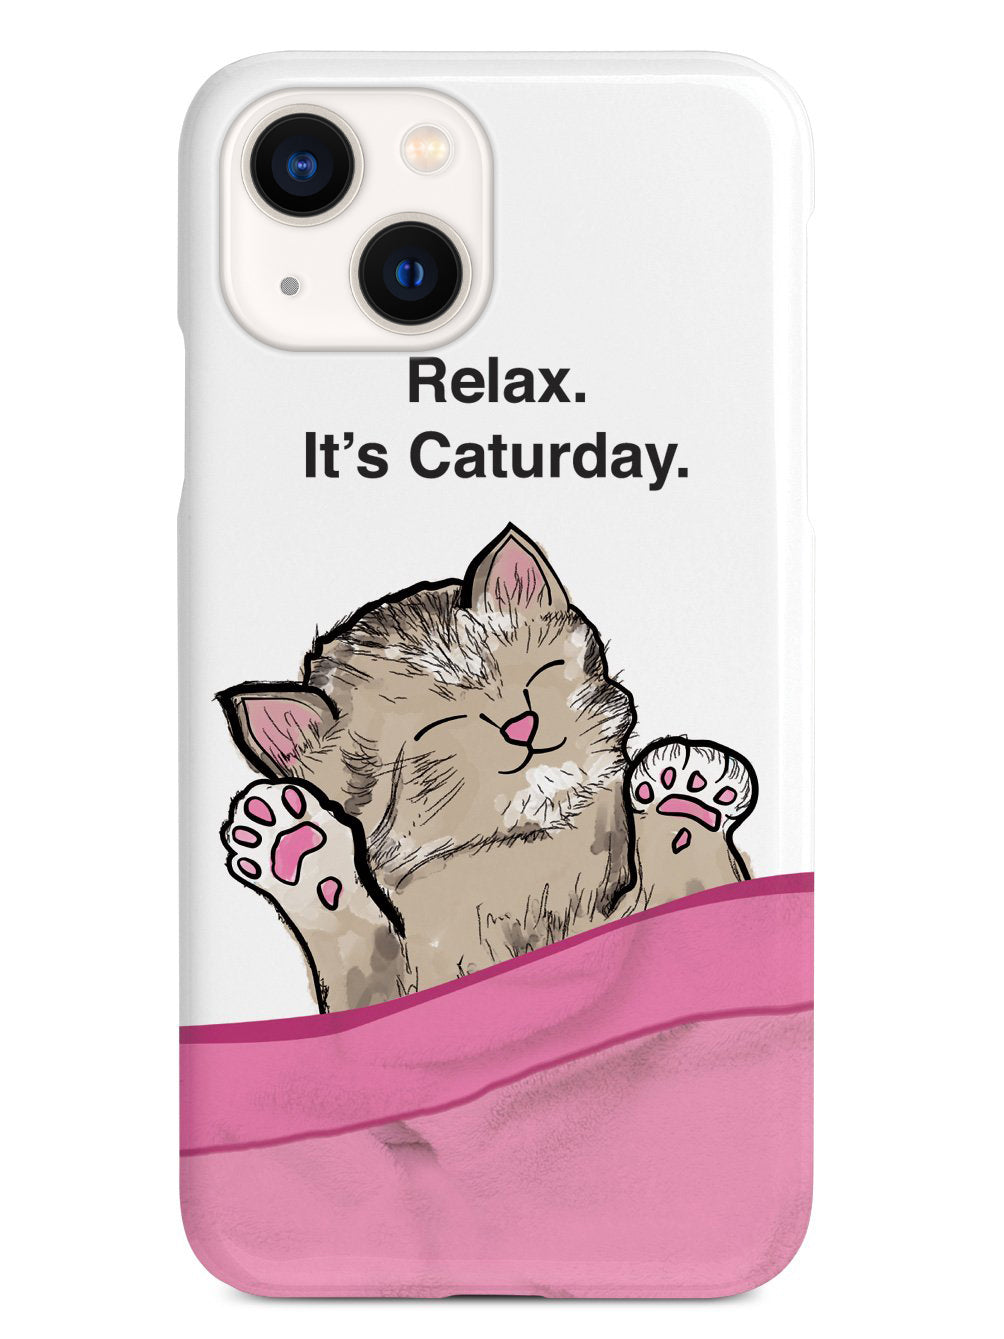 Relax! It's Caturday Case